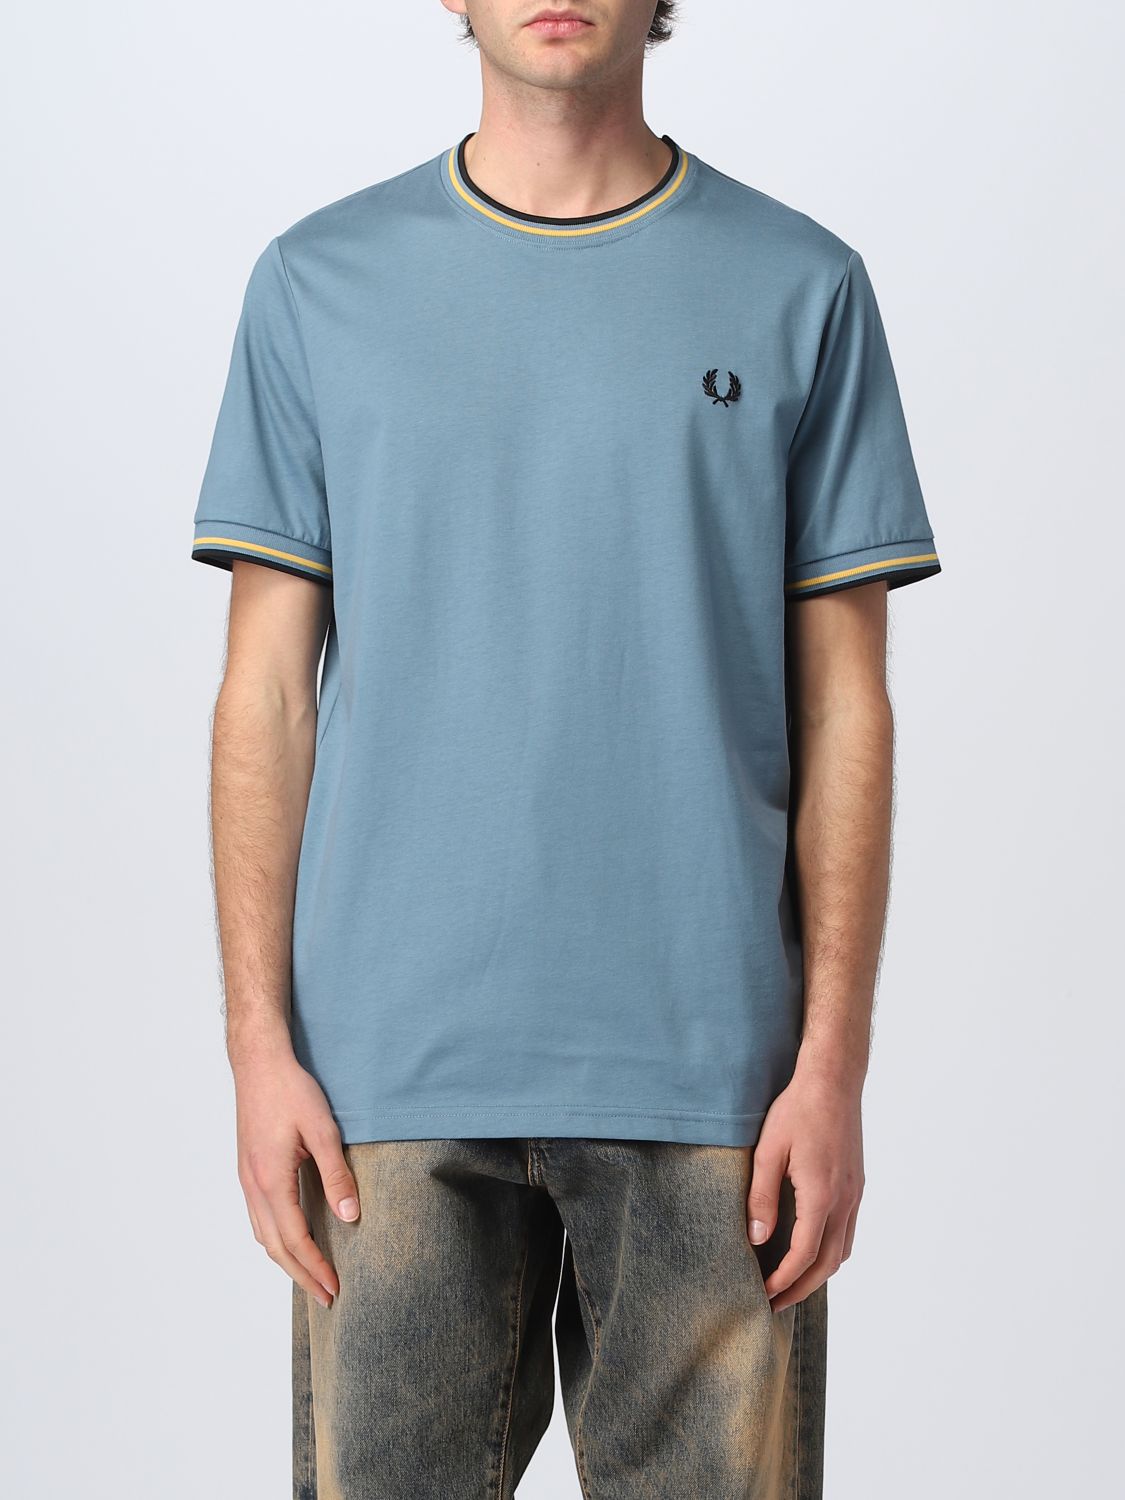 Saml op Diskant Stadion FRED PERRY: t-shirt for man - Blue 1 | Fred Perry t-shirt M1588 online on  GIGLIO.COM